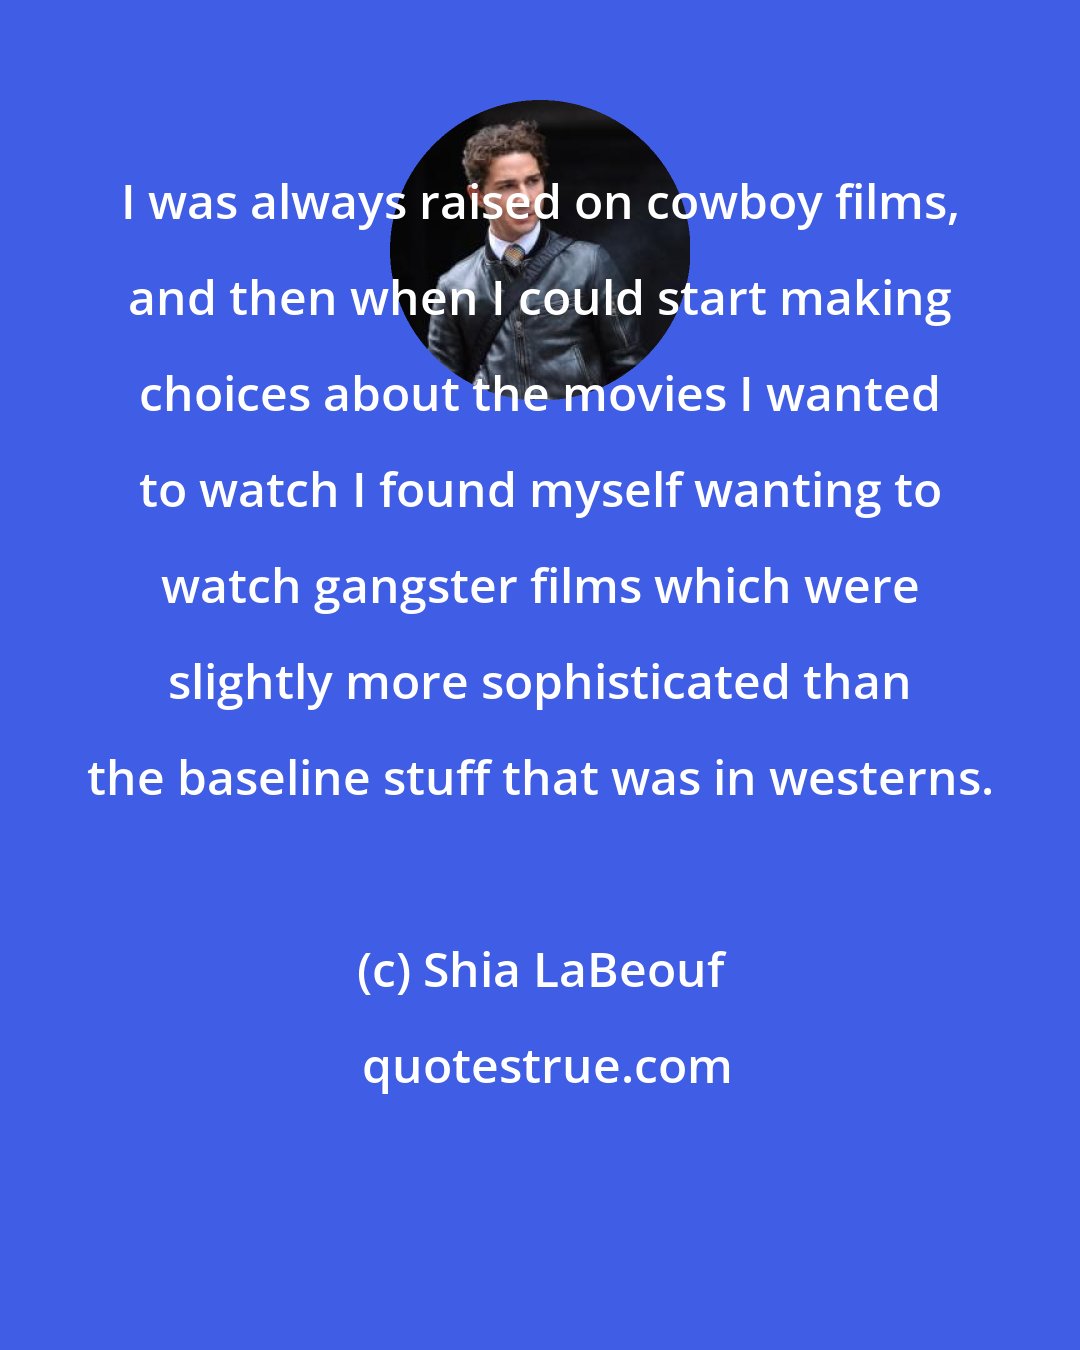 Shia LaBeouf: I was always raised on cowboy films, and then when I could start making choices about the movies I wanted to watch I found myself wanting to watch gangster films which were slightly more sophisticated than the baseline stuff that was in westerns.